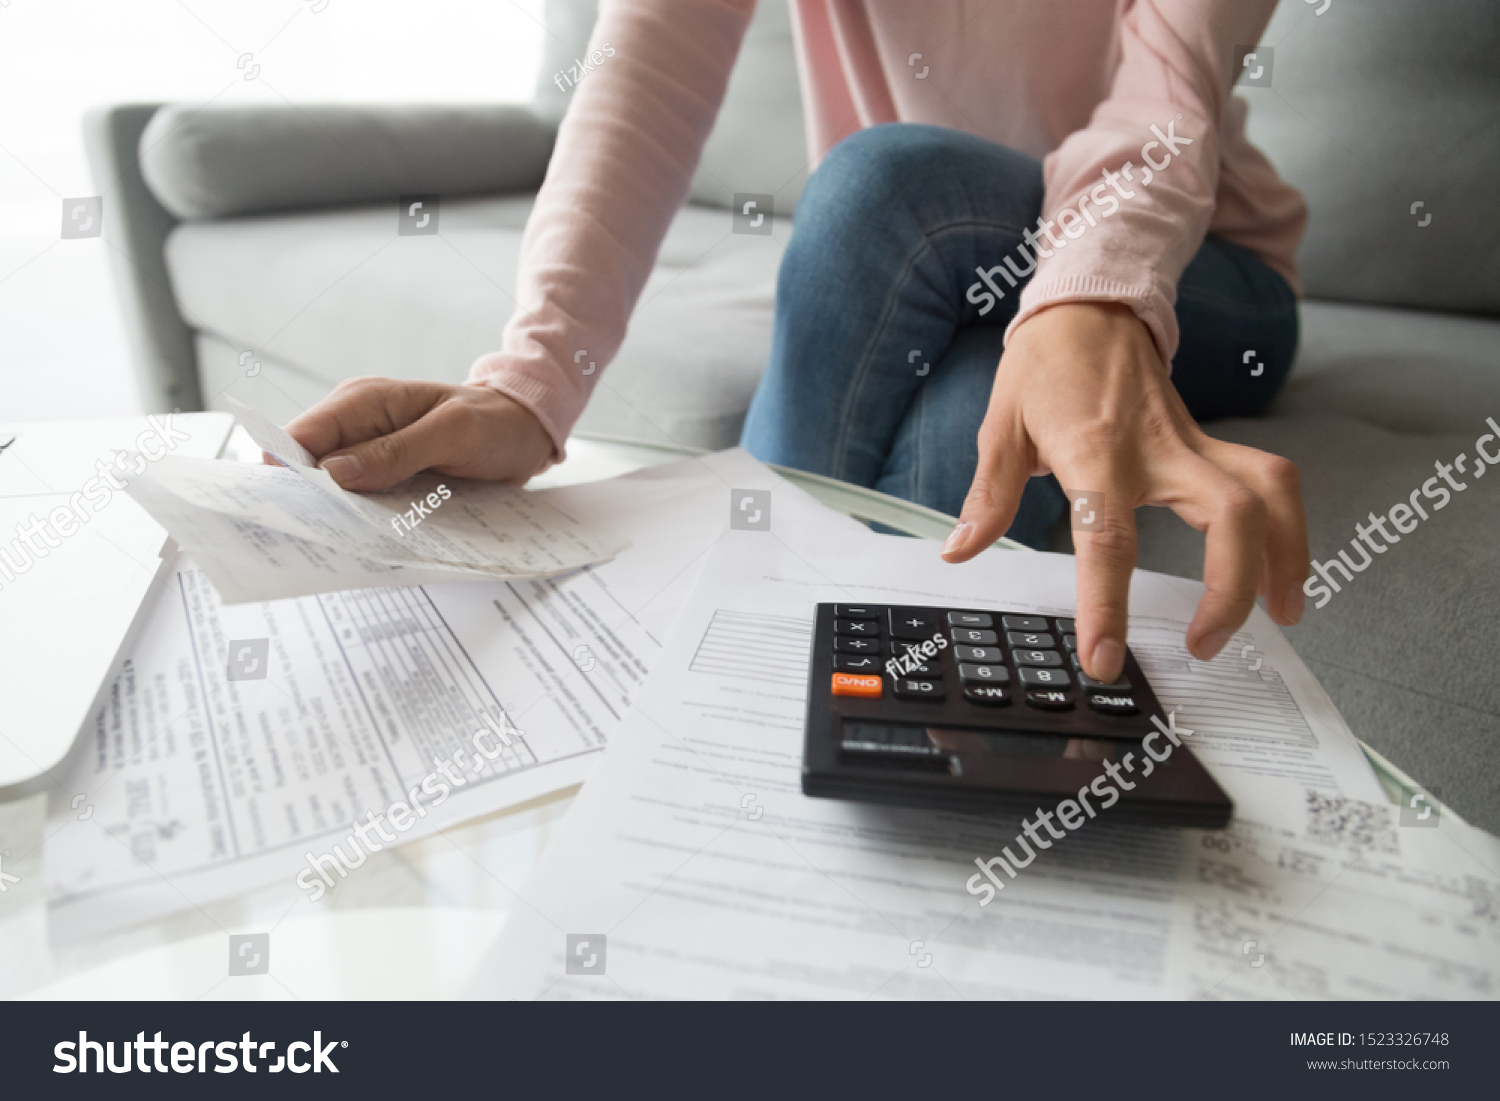 Woman renter holding paper bills using calculator for business financial accounting calculate money bank loan rent payments manage expenses finances taxes doing paperwork concept, close up view #1523326748